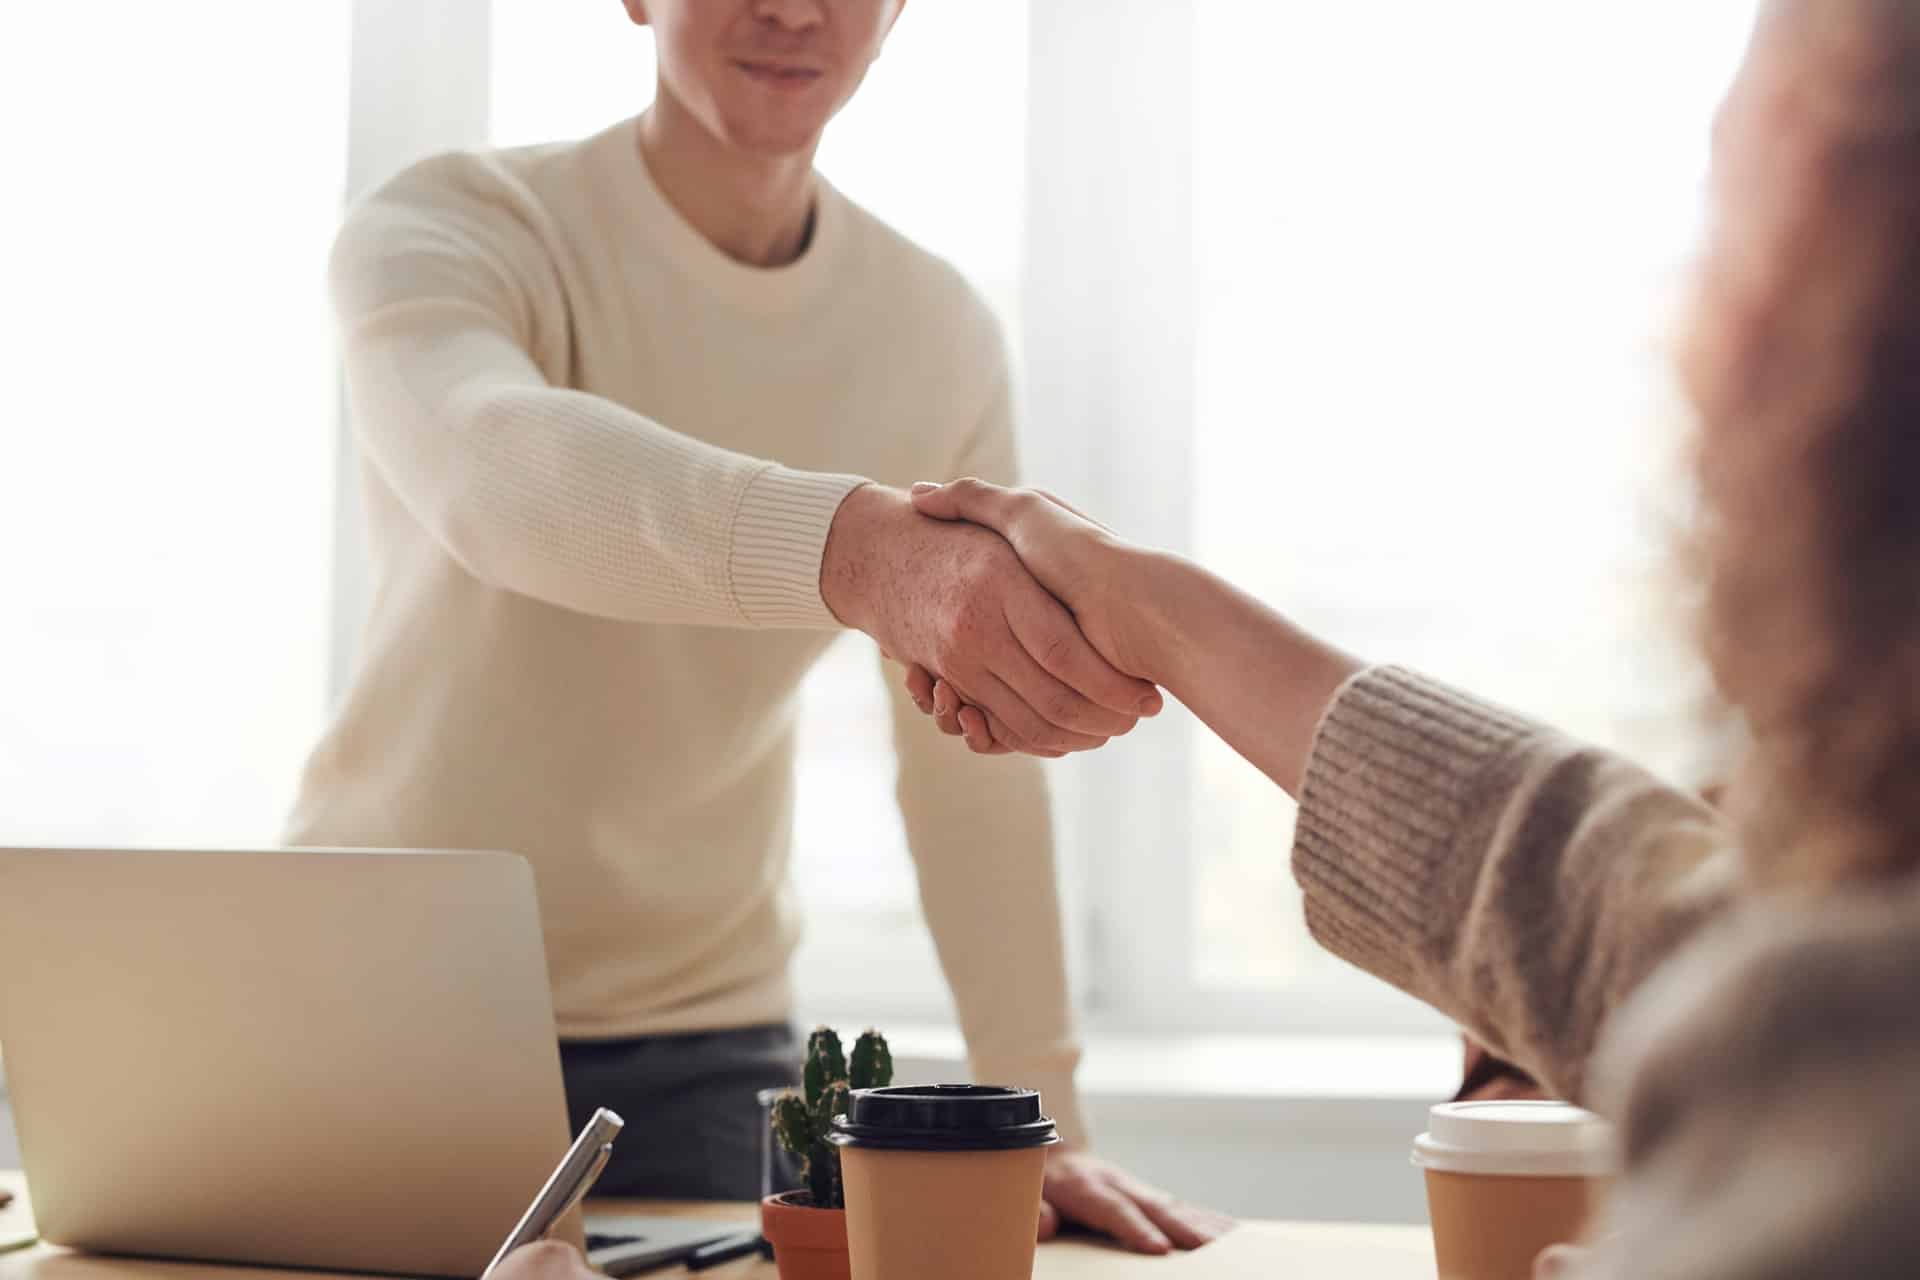 Image of 2 people shaking hands